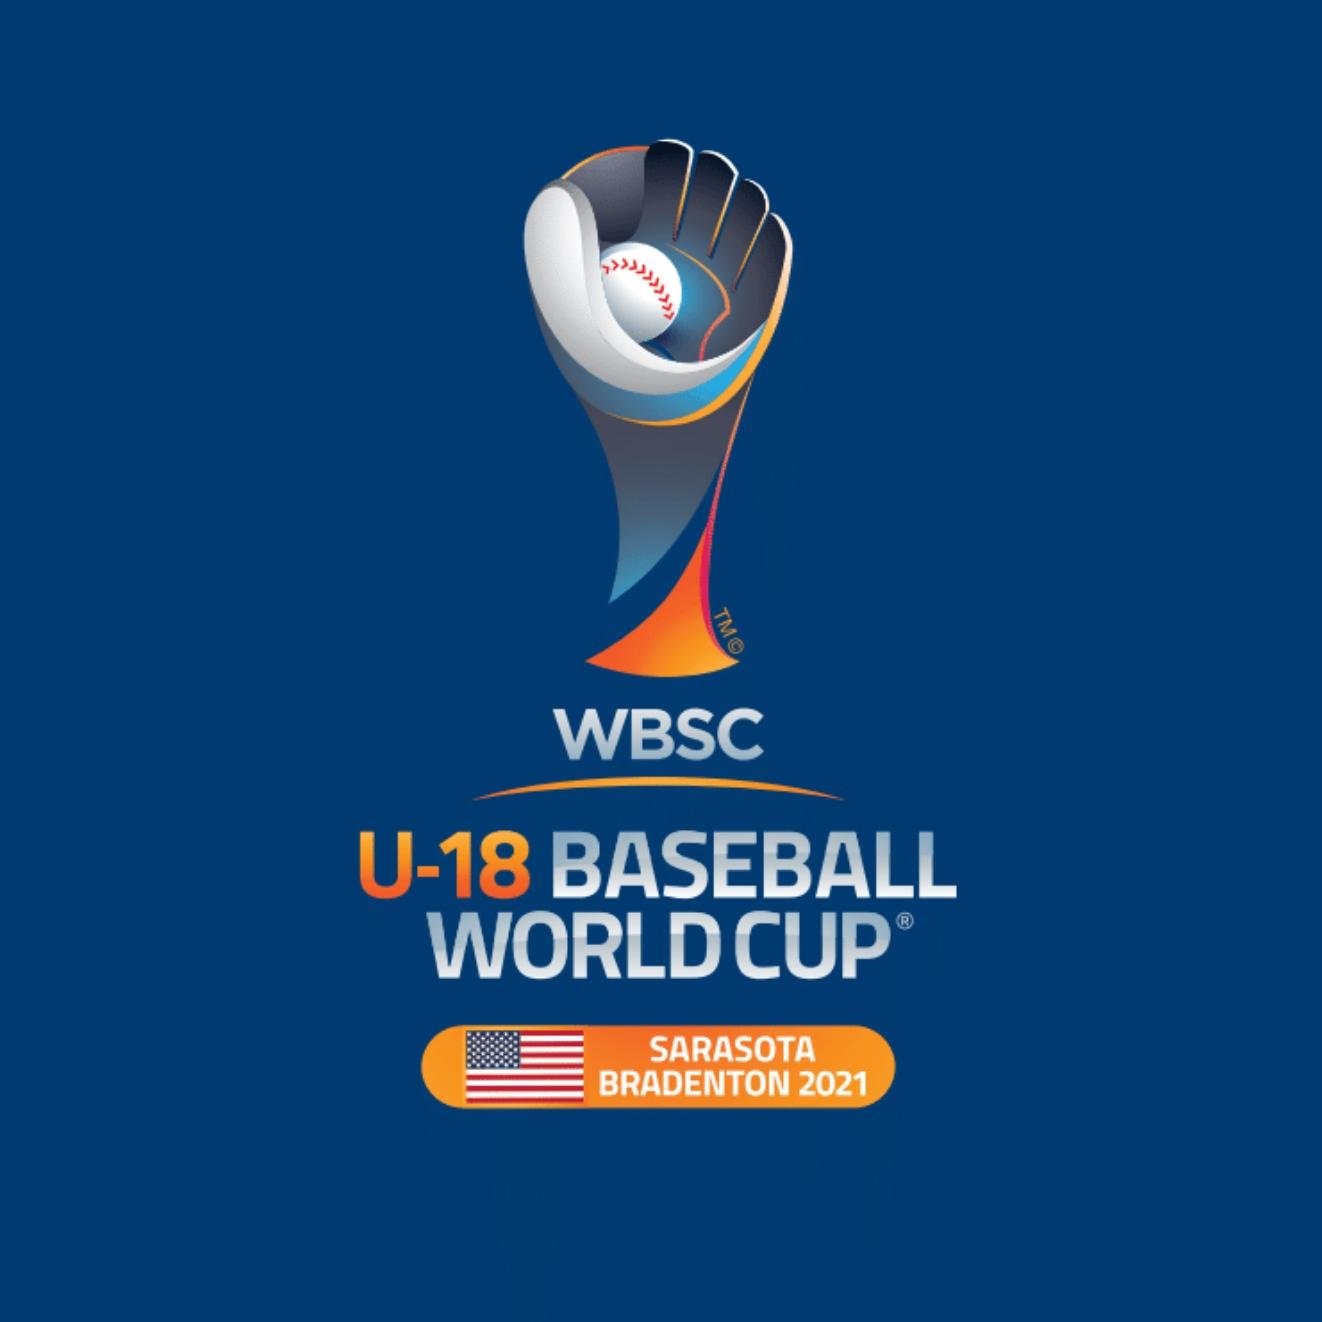 The cities of Sarasota and Bradenton, Florida, will host the @WBSC #U18WorldCup from September 9-18, 2022.